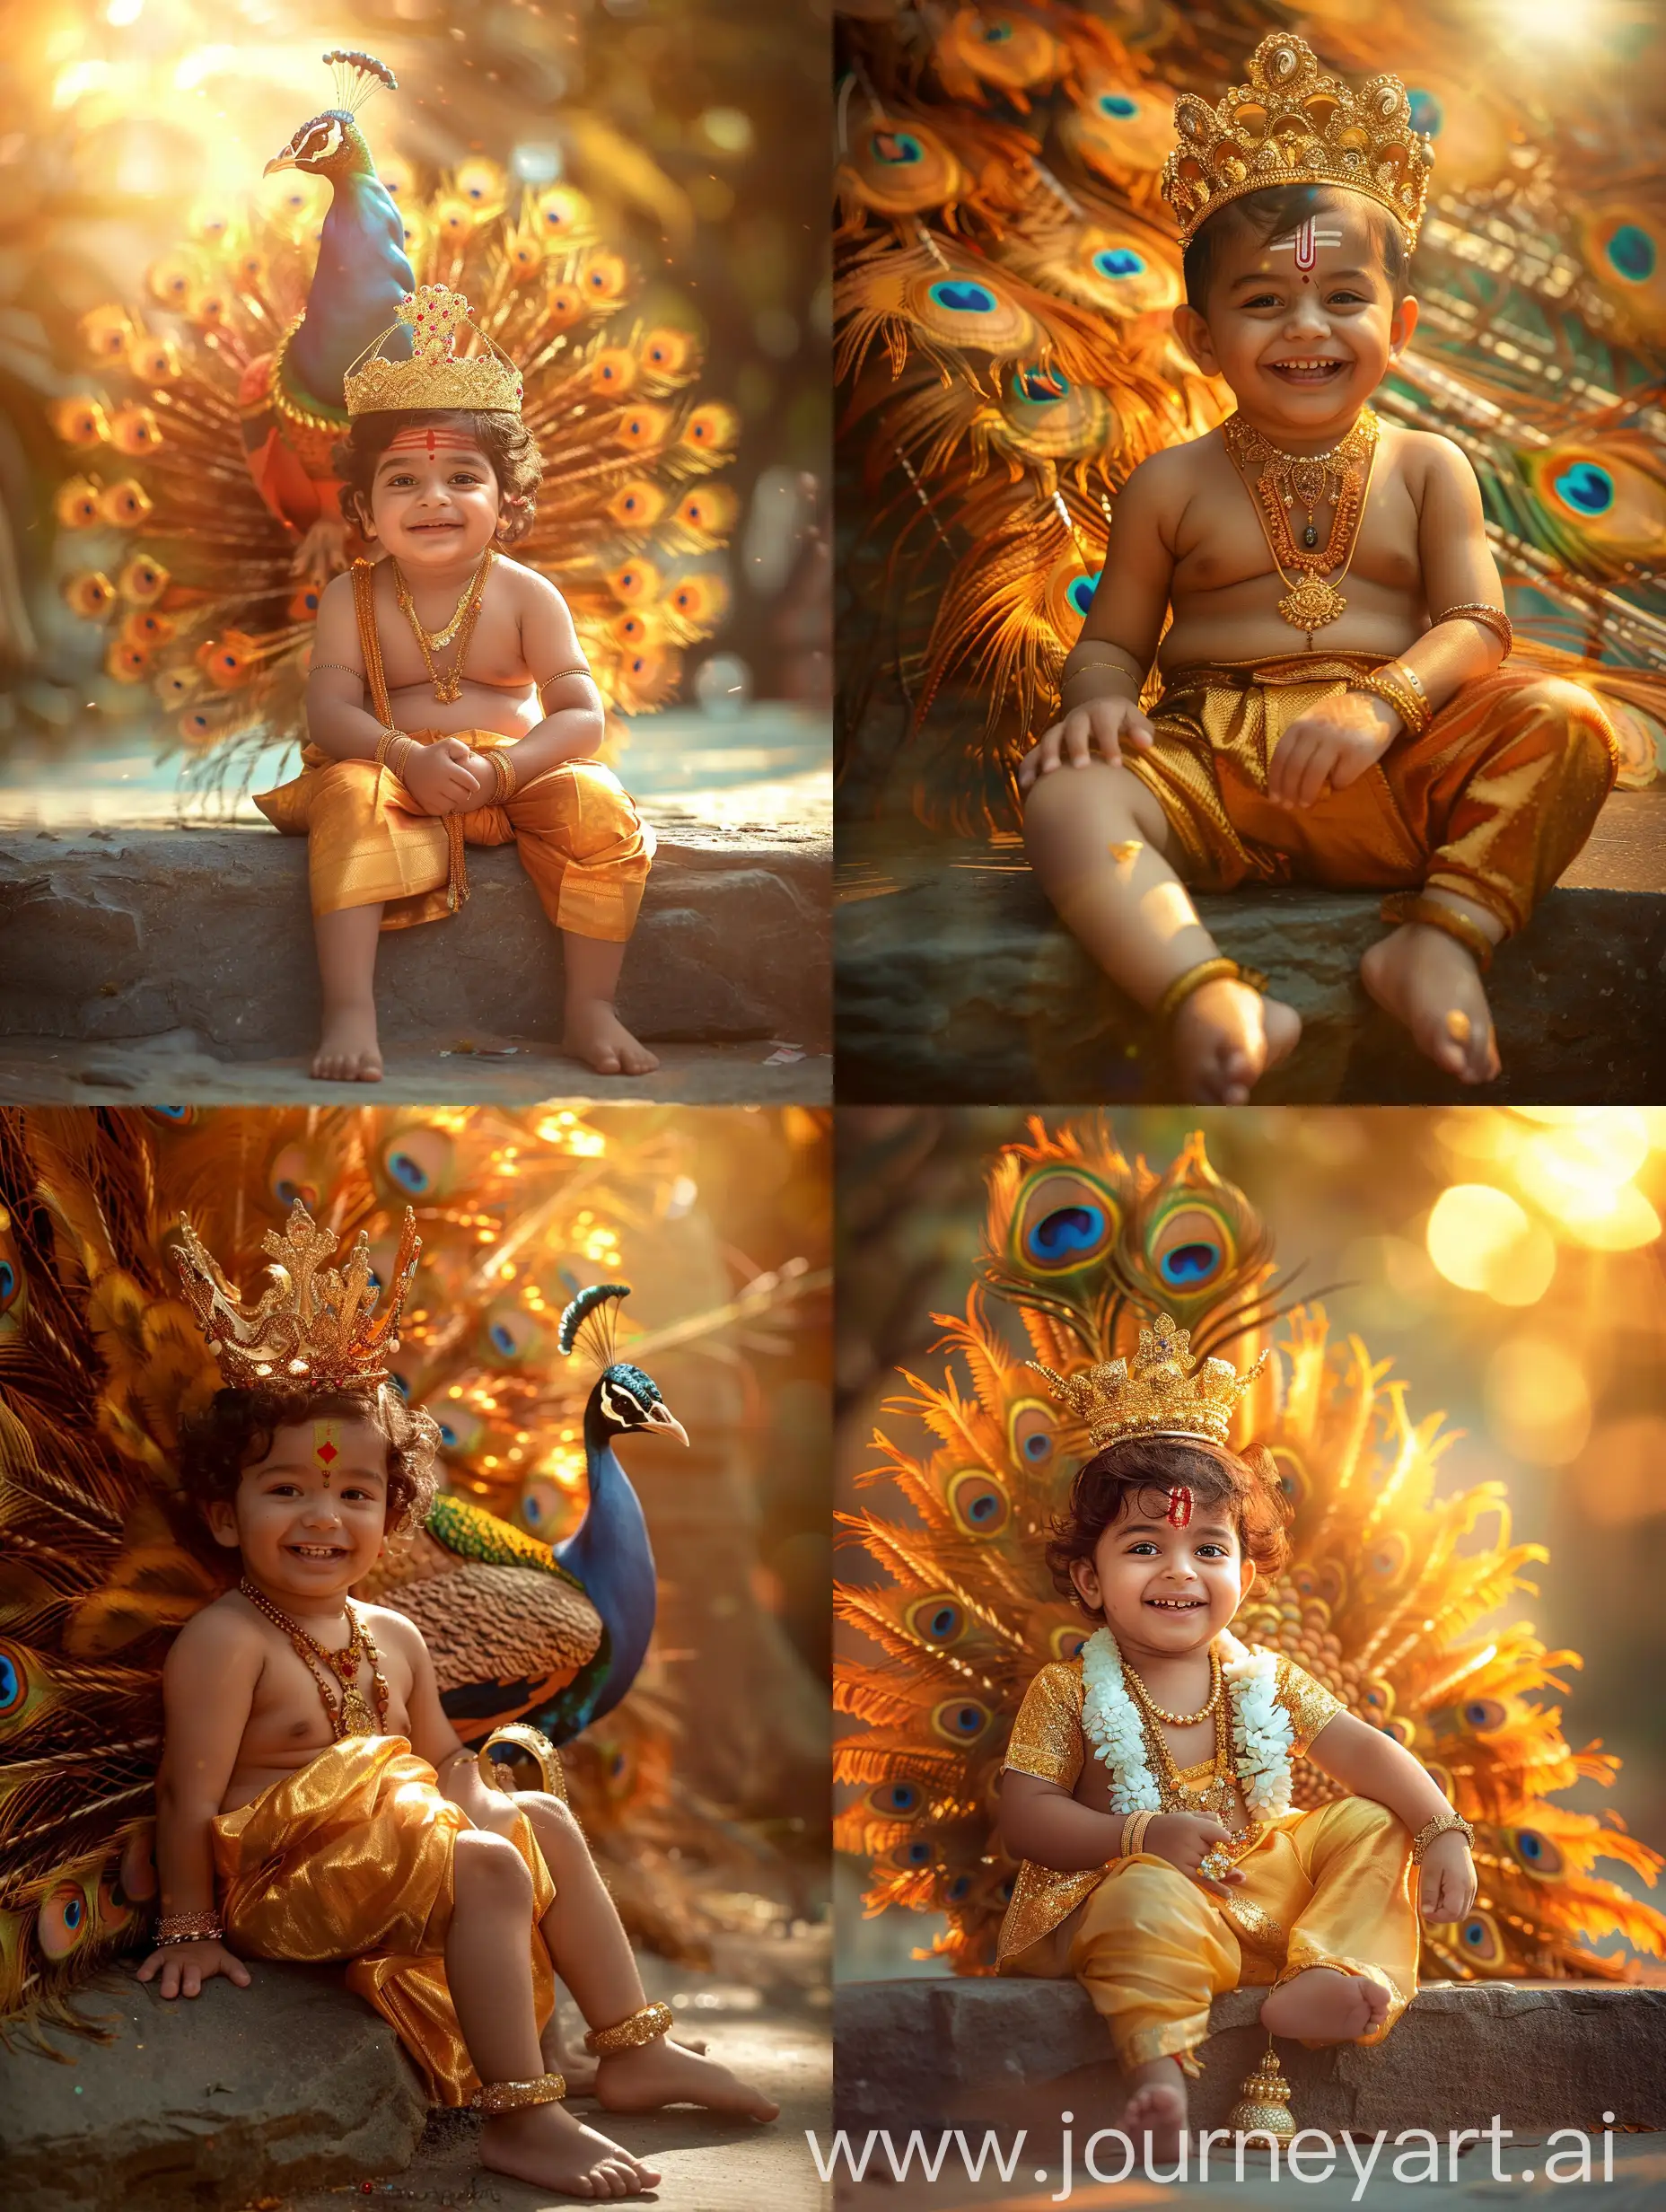 create a 3 years old real boy as realistic lord murugan , golden jarigai attire , crown on head , cute smile , sitting on stone , cinematic colour, sunlight shadow on behind , artistic peacock feather behind murugan, peacock full of orange shade colour, jewels , anklets , vel on murugan hand,  photorealistic 4k image